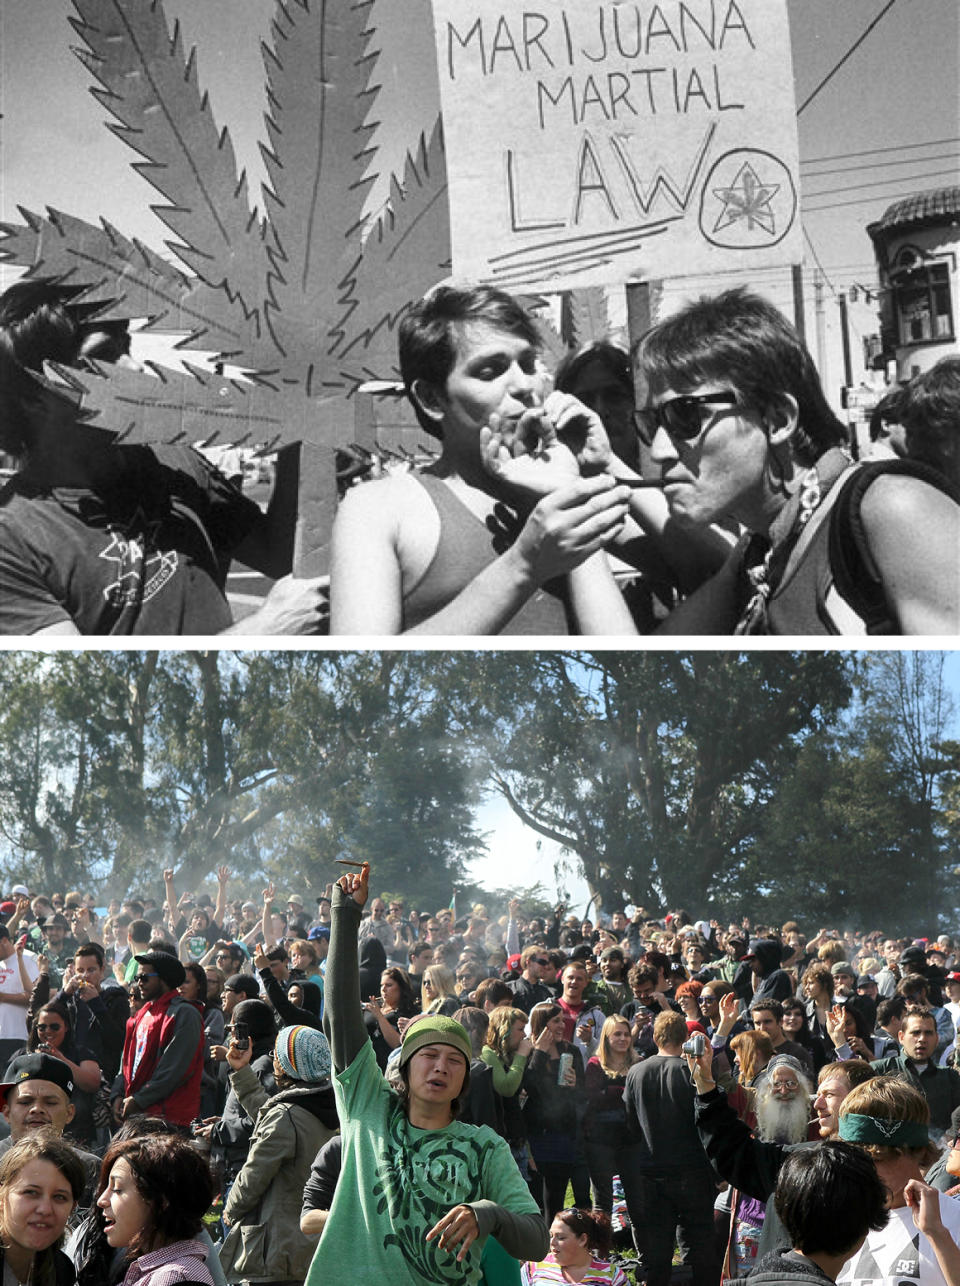 Top: Two protesters take a drag on each other's joints during a rally and parade organized by the Northern California Marijuana Growers in San Francisco in 1984. Bottom: A cloud of smoke rests over the heads of a group of people during a 420 Day celebration on 